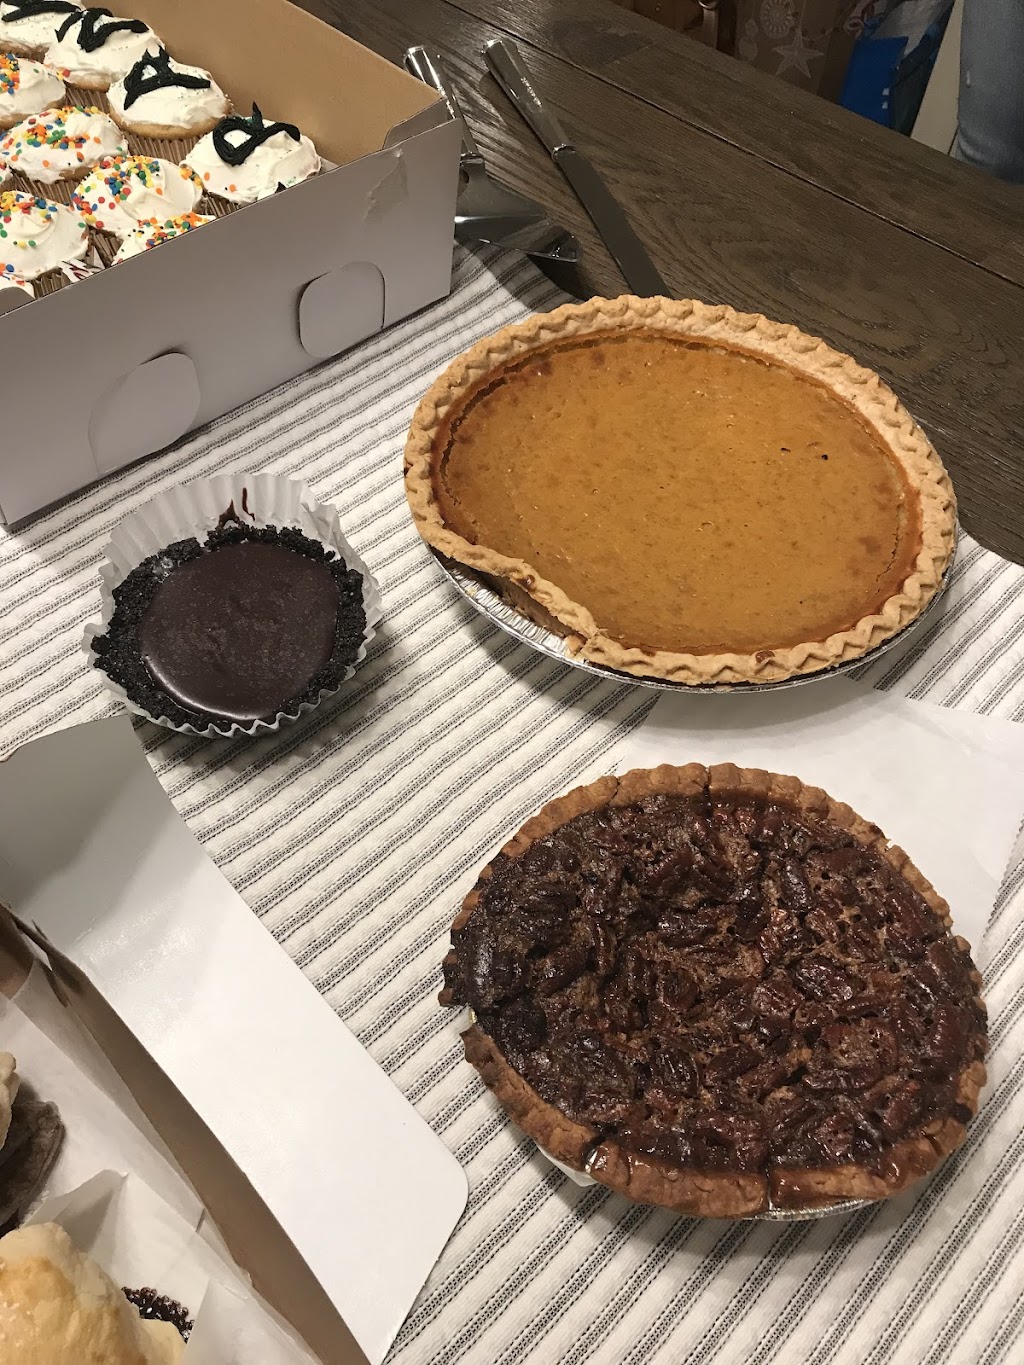 Shannon’s Eyes on the Pies | 252 Pine Island Turnpike, Warwick, NY 10990 | Phone: (845) 324-8915